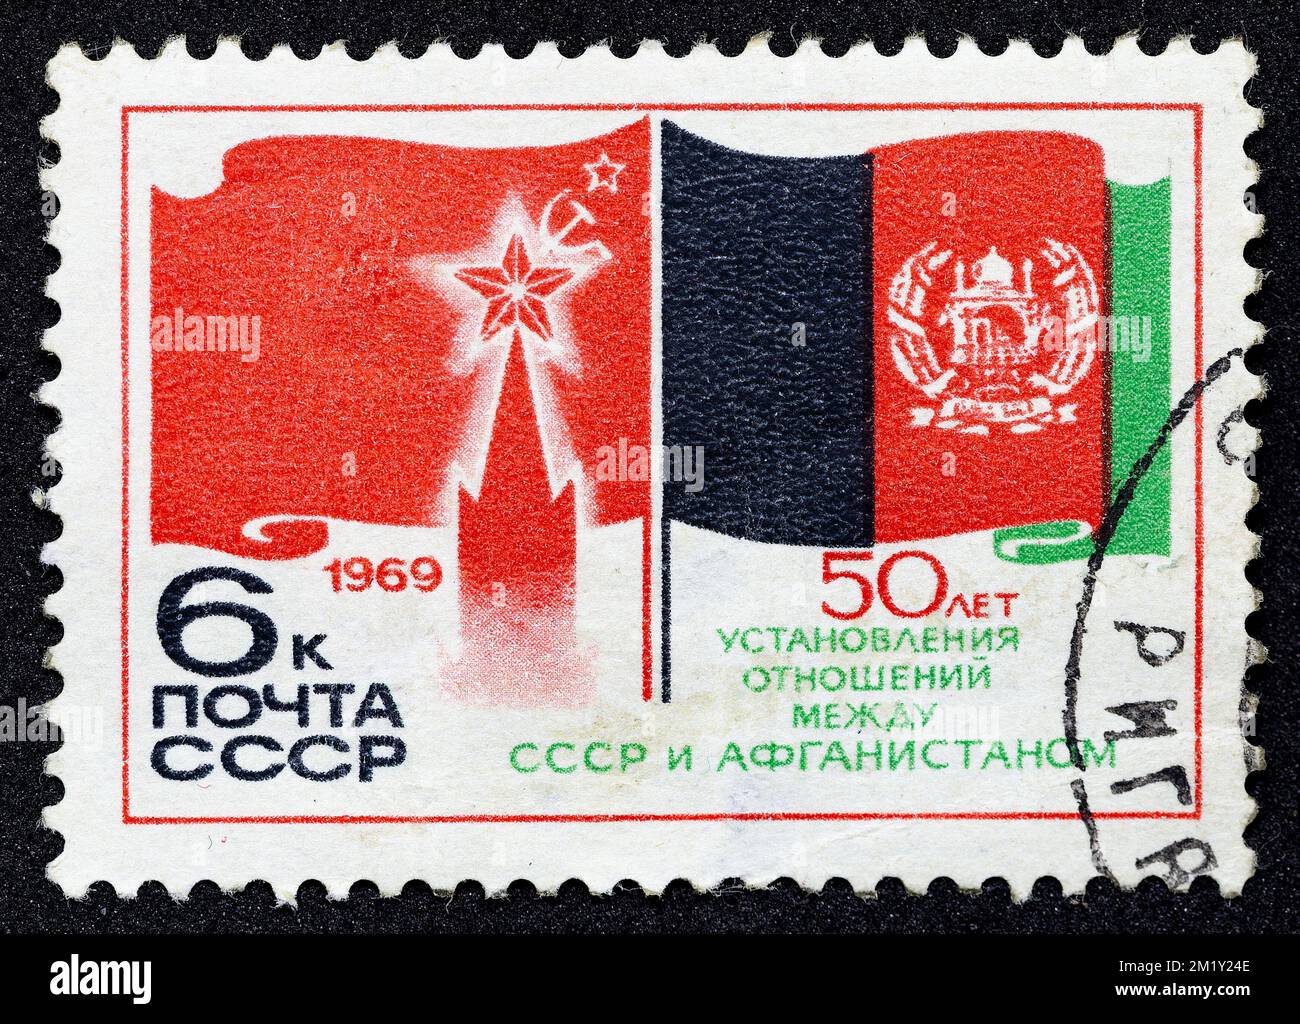 USSR - CIRCA 1969: Postage stamp 6 kopeck printed in the Soviet Union shows two country flags and coats of arms. Post stamp series devoted 50 years of Stock Photo